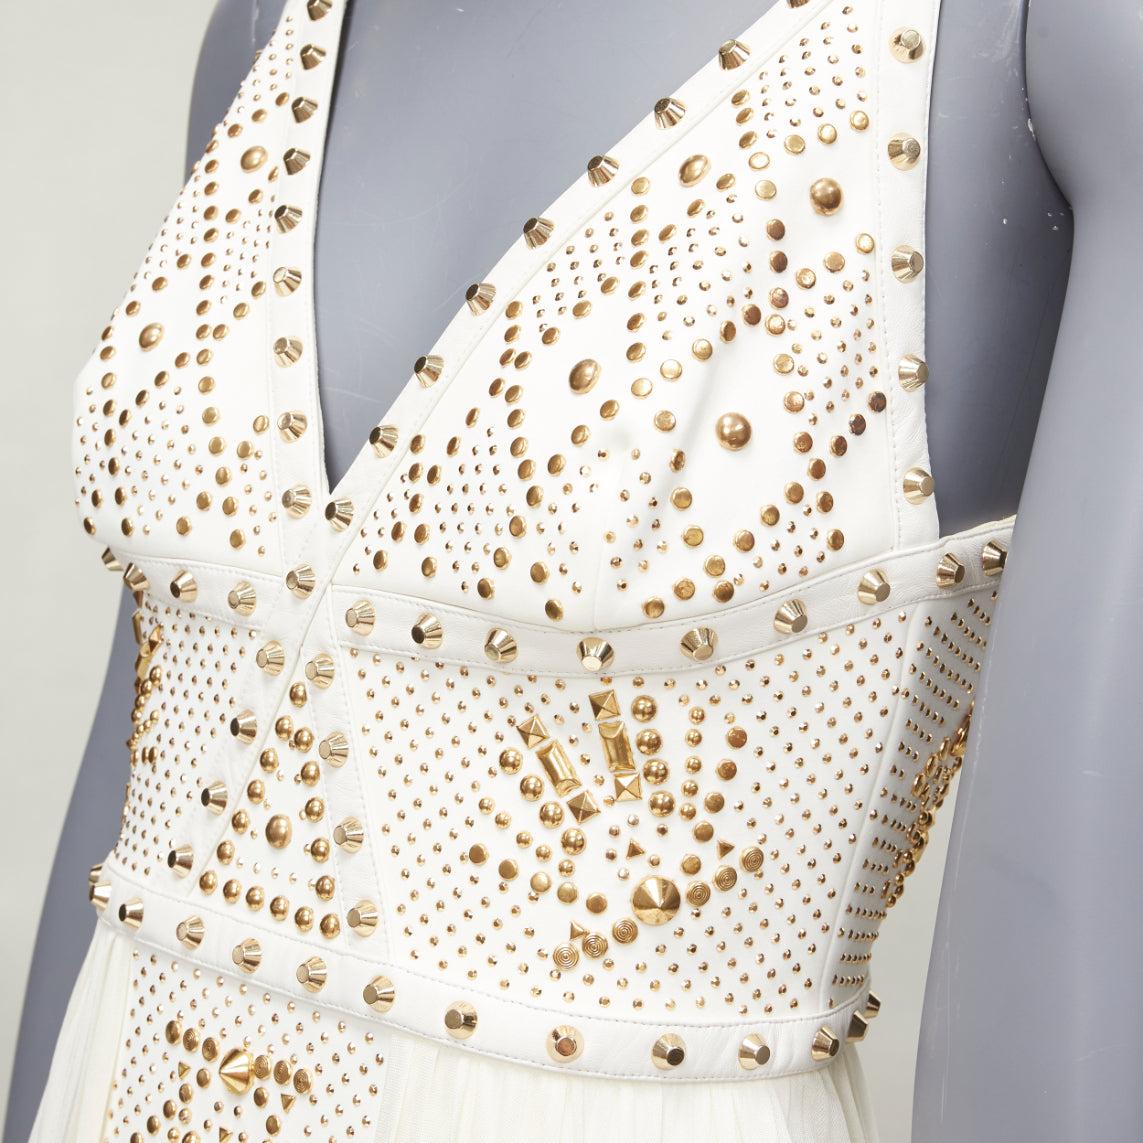 VERSACE 2011 Runway white studded leather silk skirt mini dress IT38 XS
Reference: TGAS/D01127
Brand: Versace
Designer: Donatella Versace
Collection: 2011 - Runway
Material: Polyamide, Leather
Color: Cream, White
Pattern: Studded
Closure: